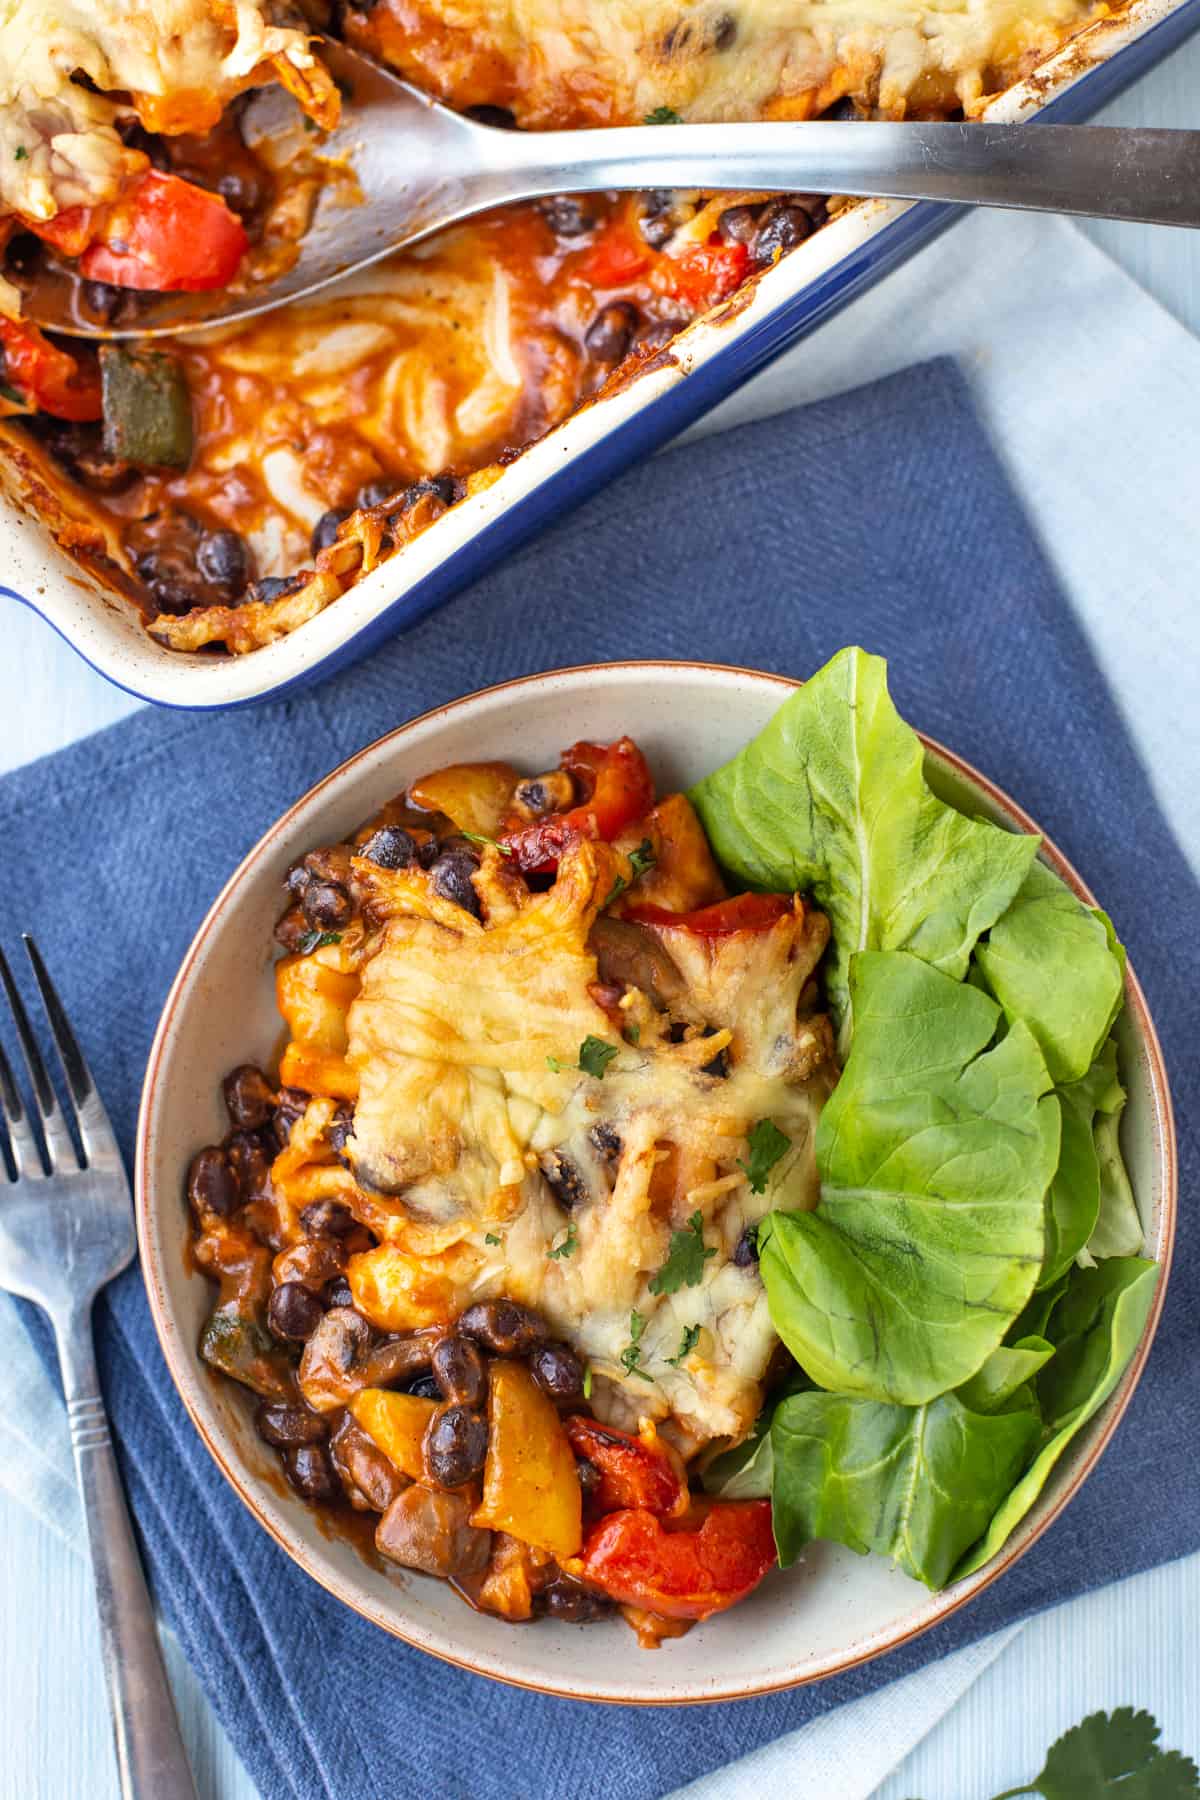 A portion of enchilada casserole with black beans, vegetables and a cheese topping.